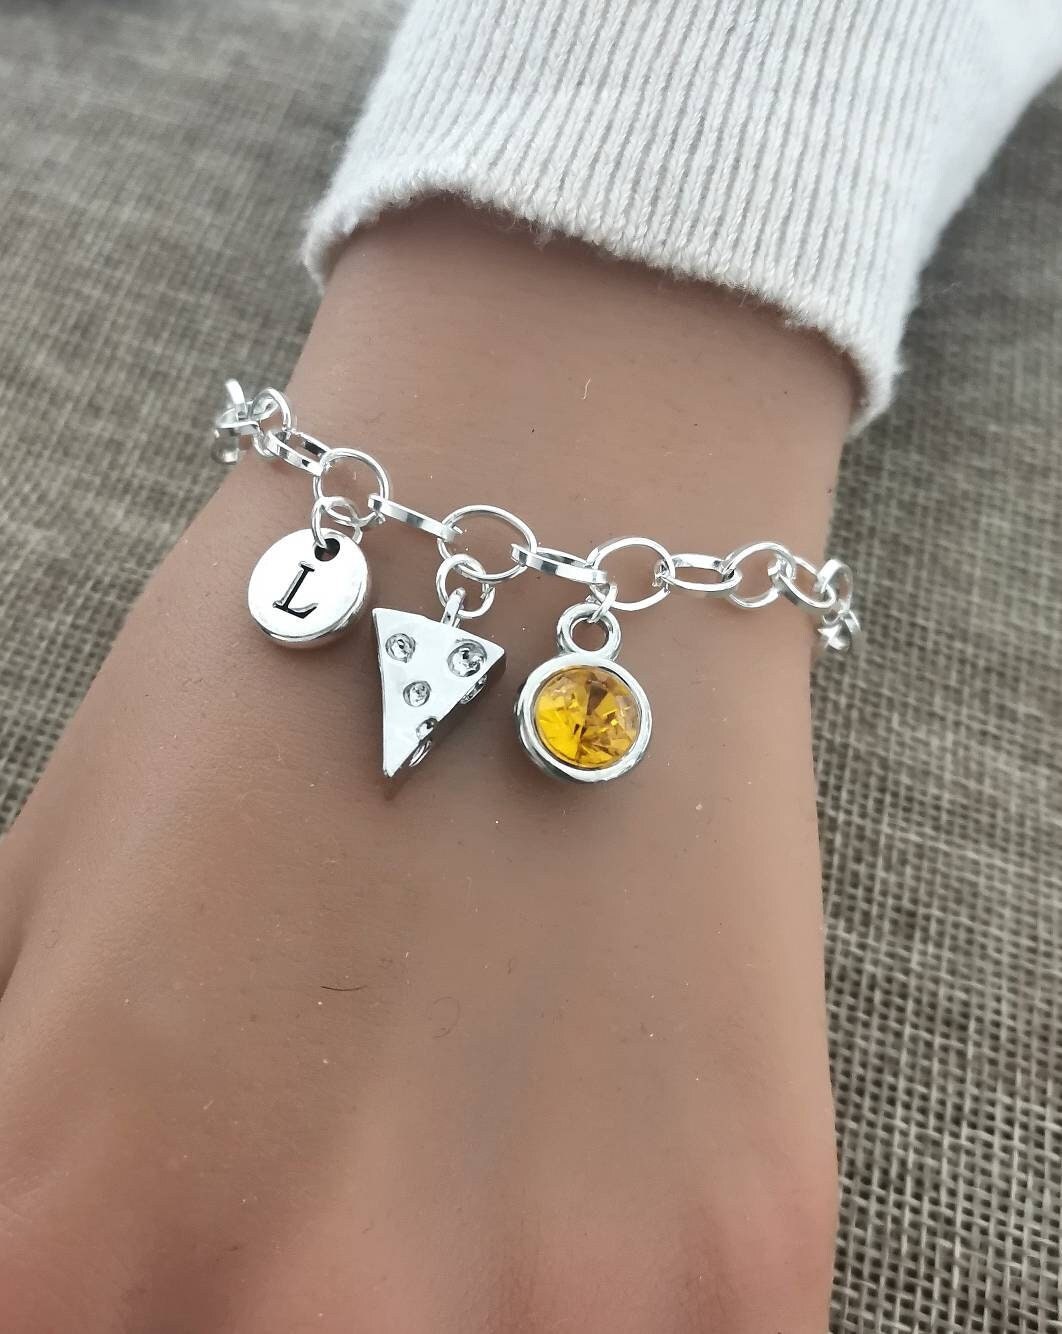 Cheese Bracelet, Cheese Gift, Cheese Jewelry, Birthday Gift for her, Foodie gift, French Gift, Chef bracelet, Bangle for her, Cheese Pendant